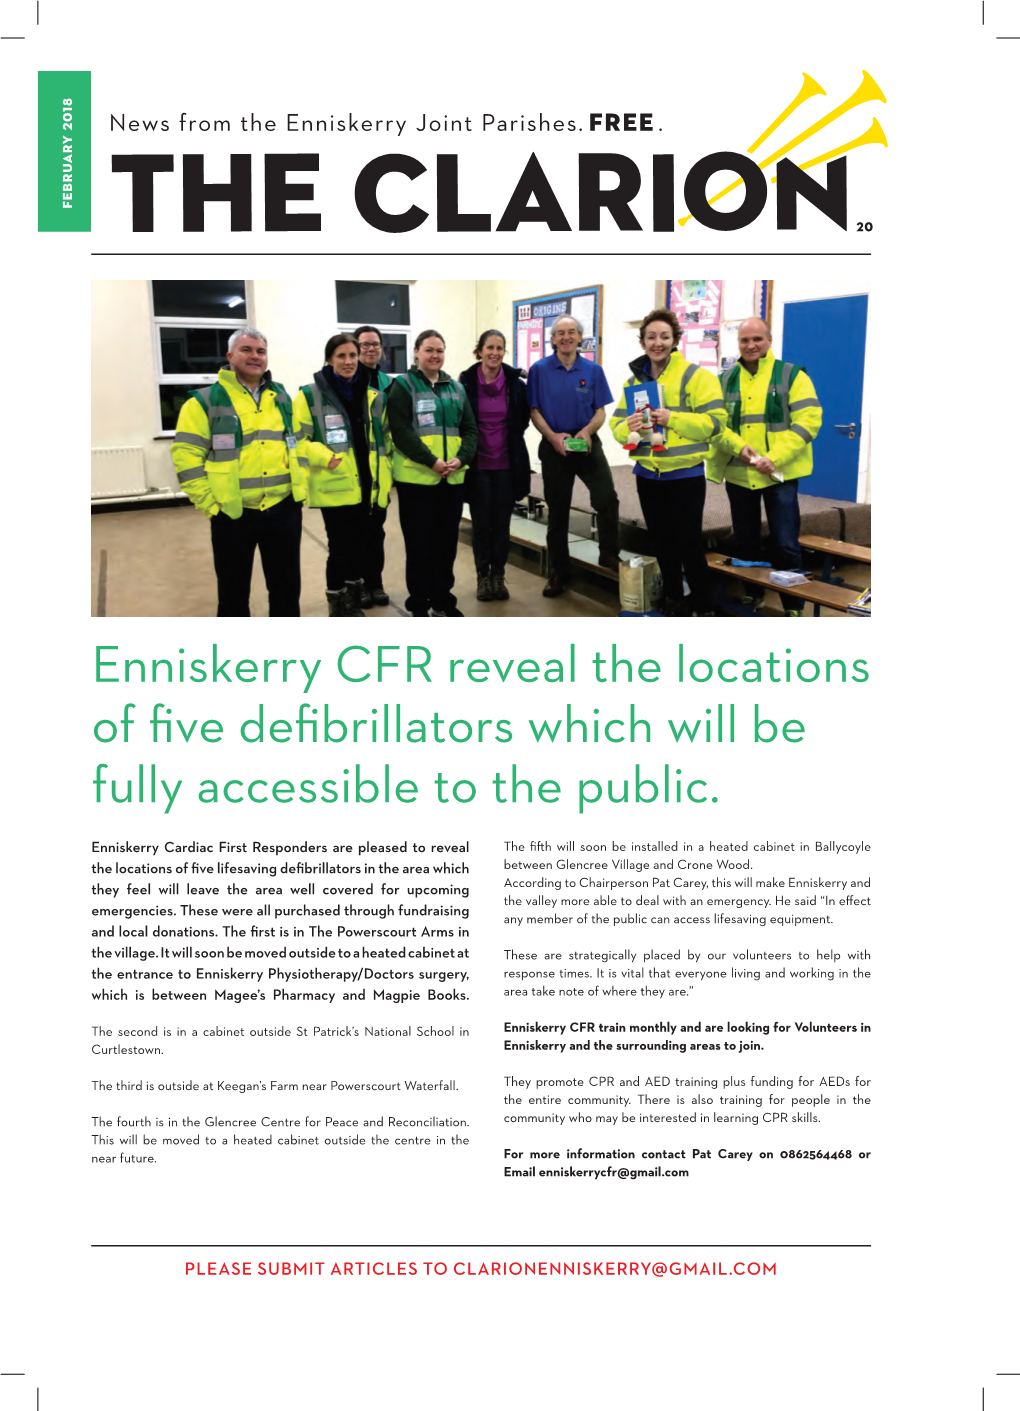 Enniskerry CFR Reveal the Locations of Five Defibrillators Which Will Be Fully